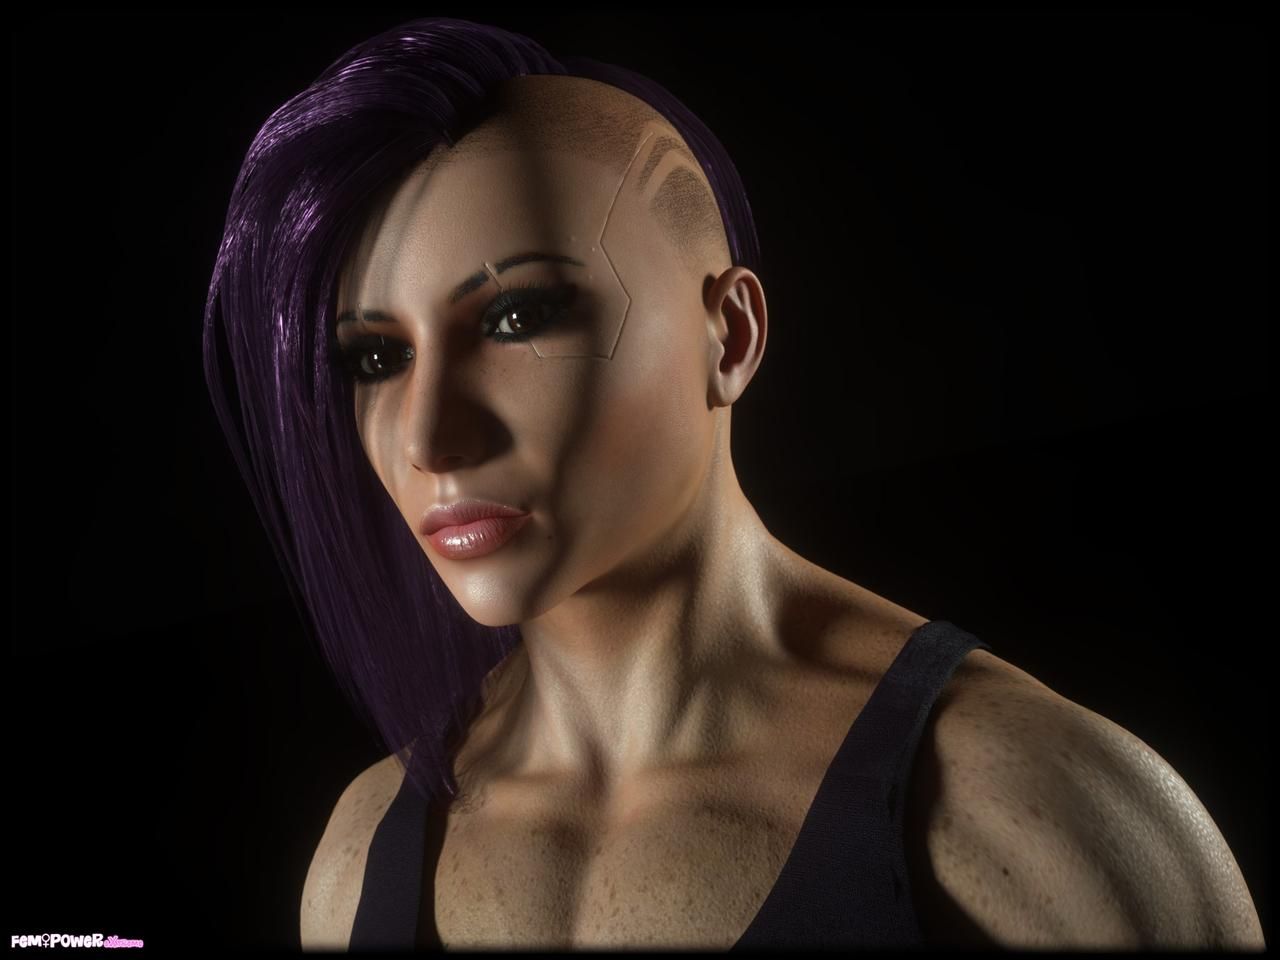 MUSCLE Ciber punk 2077 and futurist concept 3D models by Tigersan 33